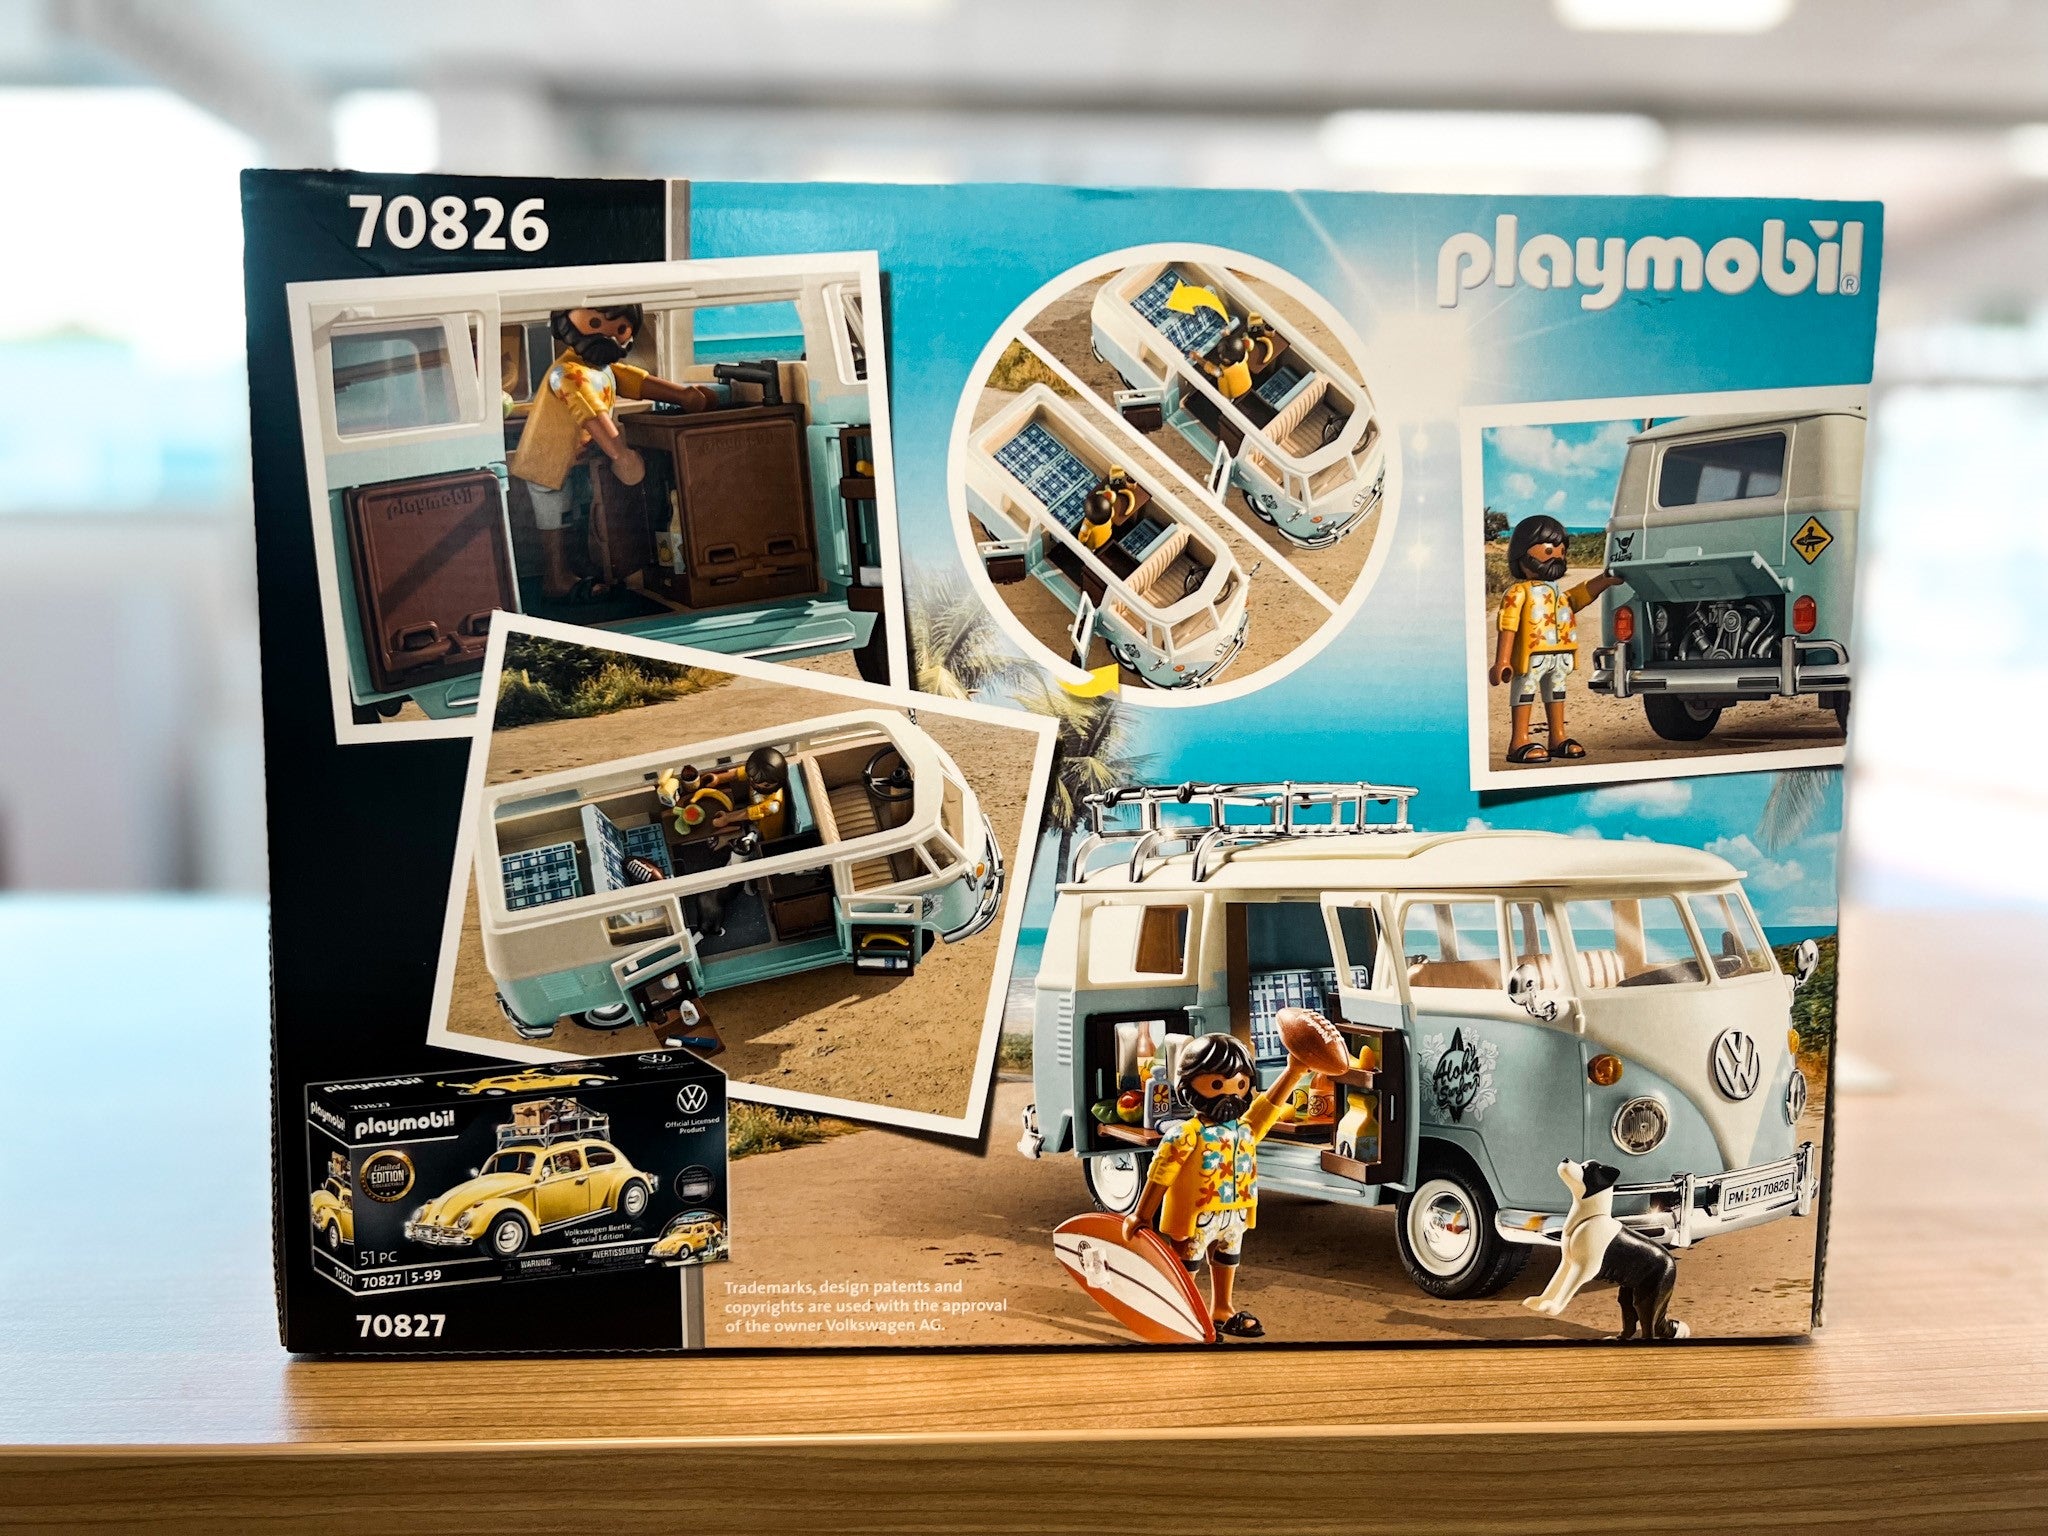 PLAYMOBIL® 70826 Volkswagen T1 Camping Bus - Special Edition / 7E9087511D